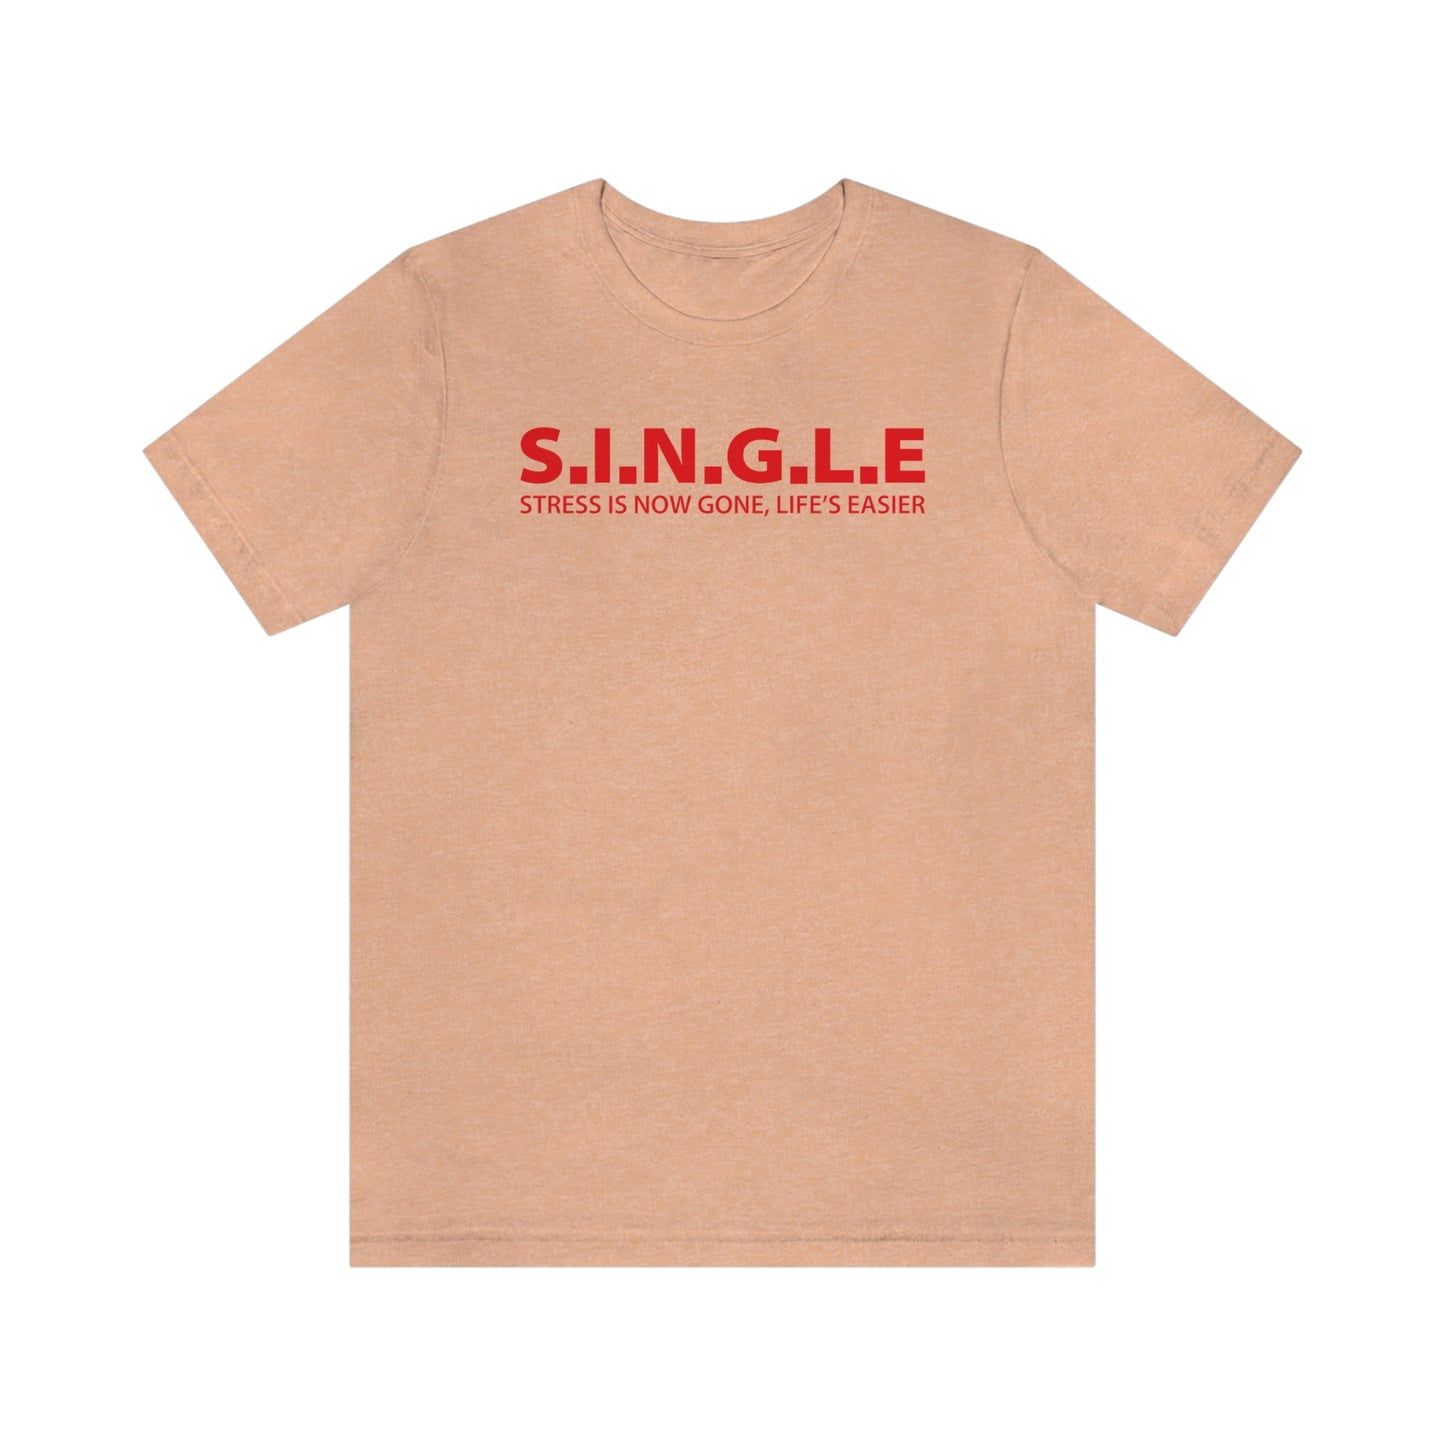 SINGLE Stress Is Now Gone, Life's Easier Valentine's Day Shirt